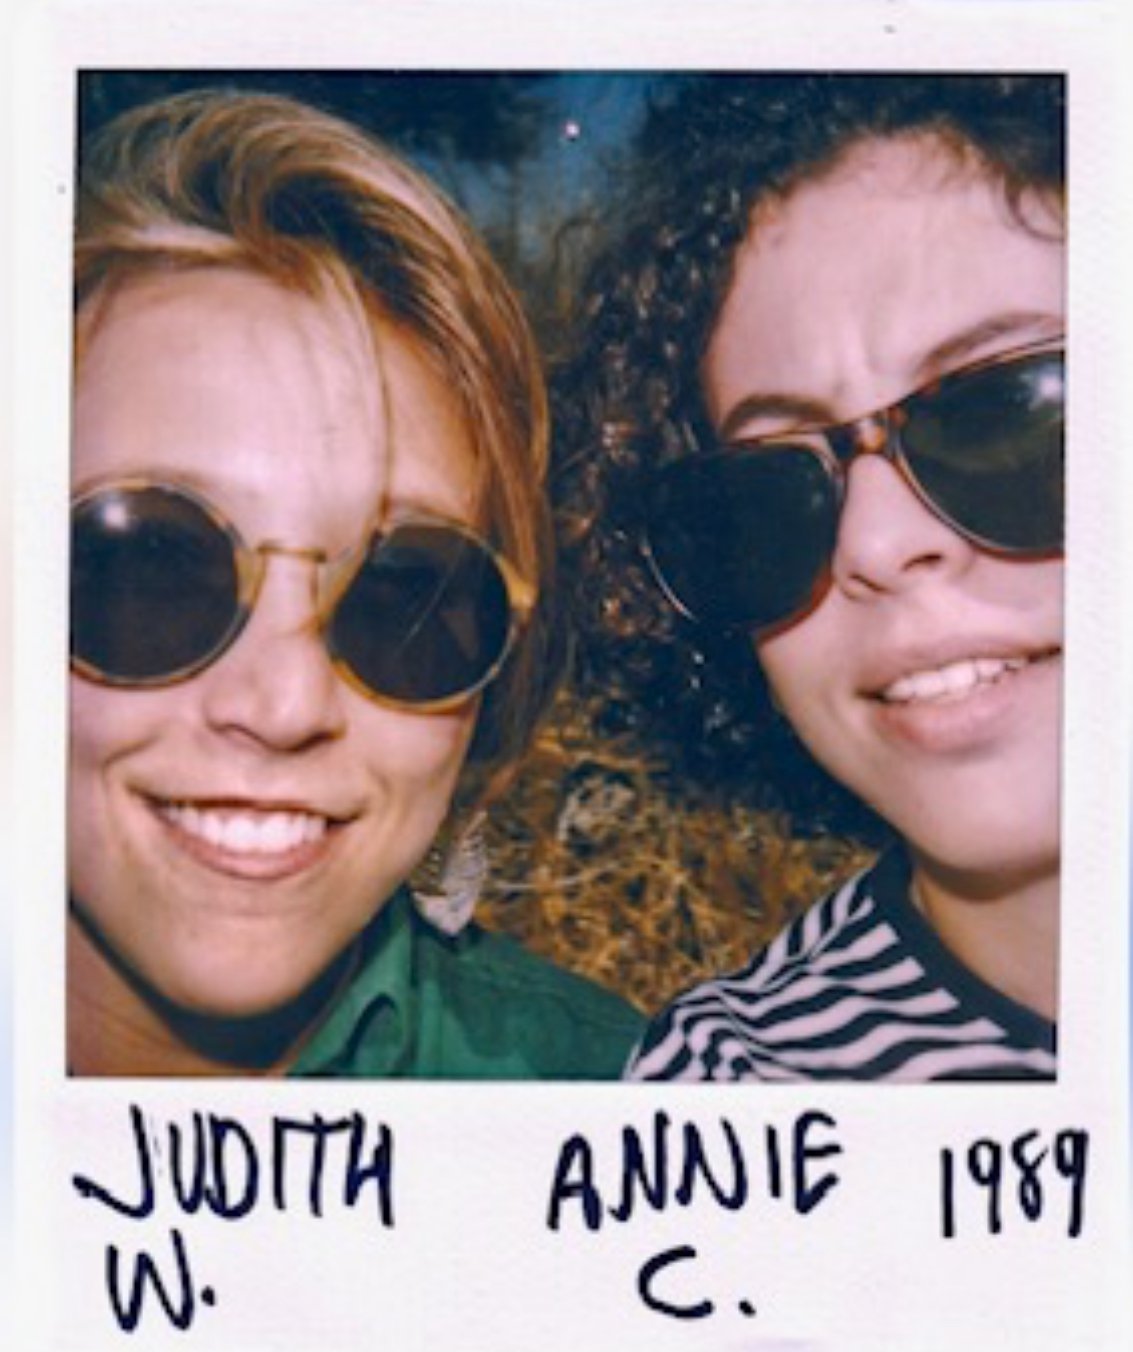  Judith Weaver and Annie Calanchini, 1989 